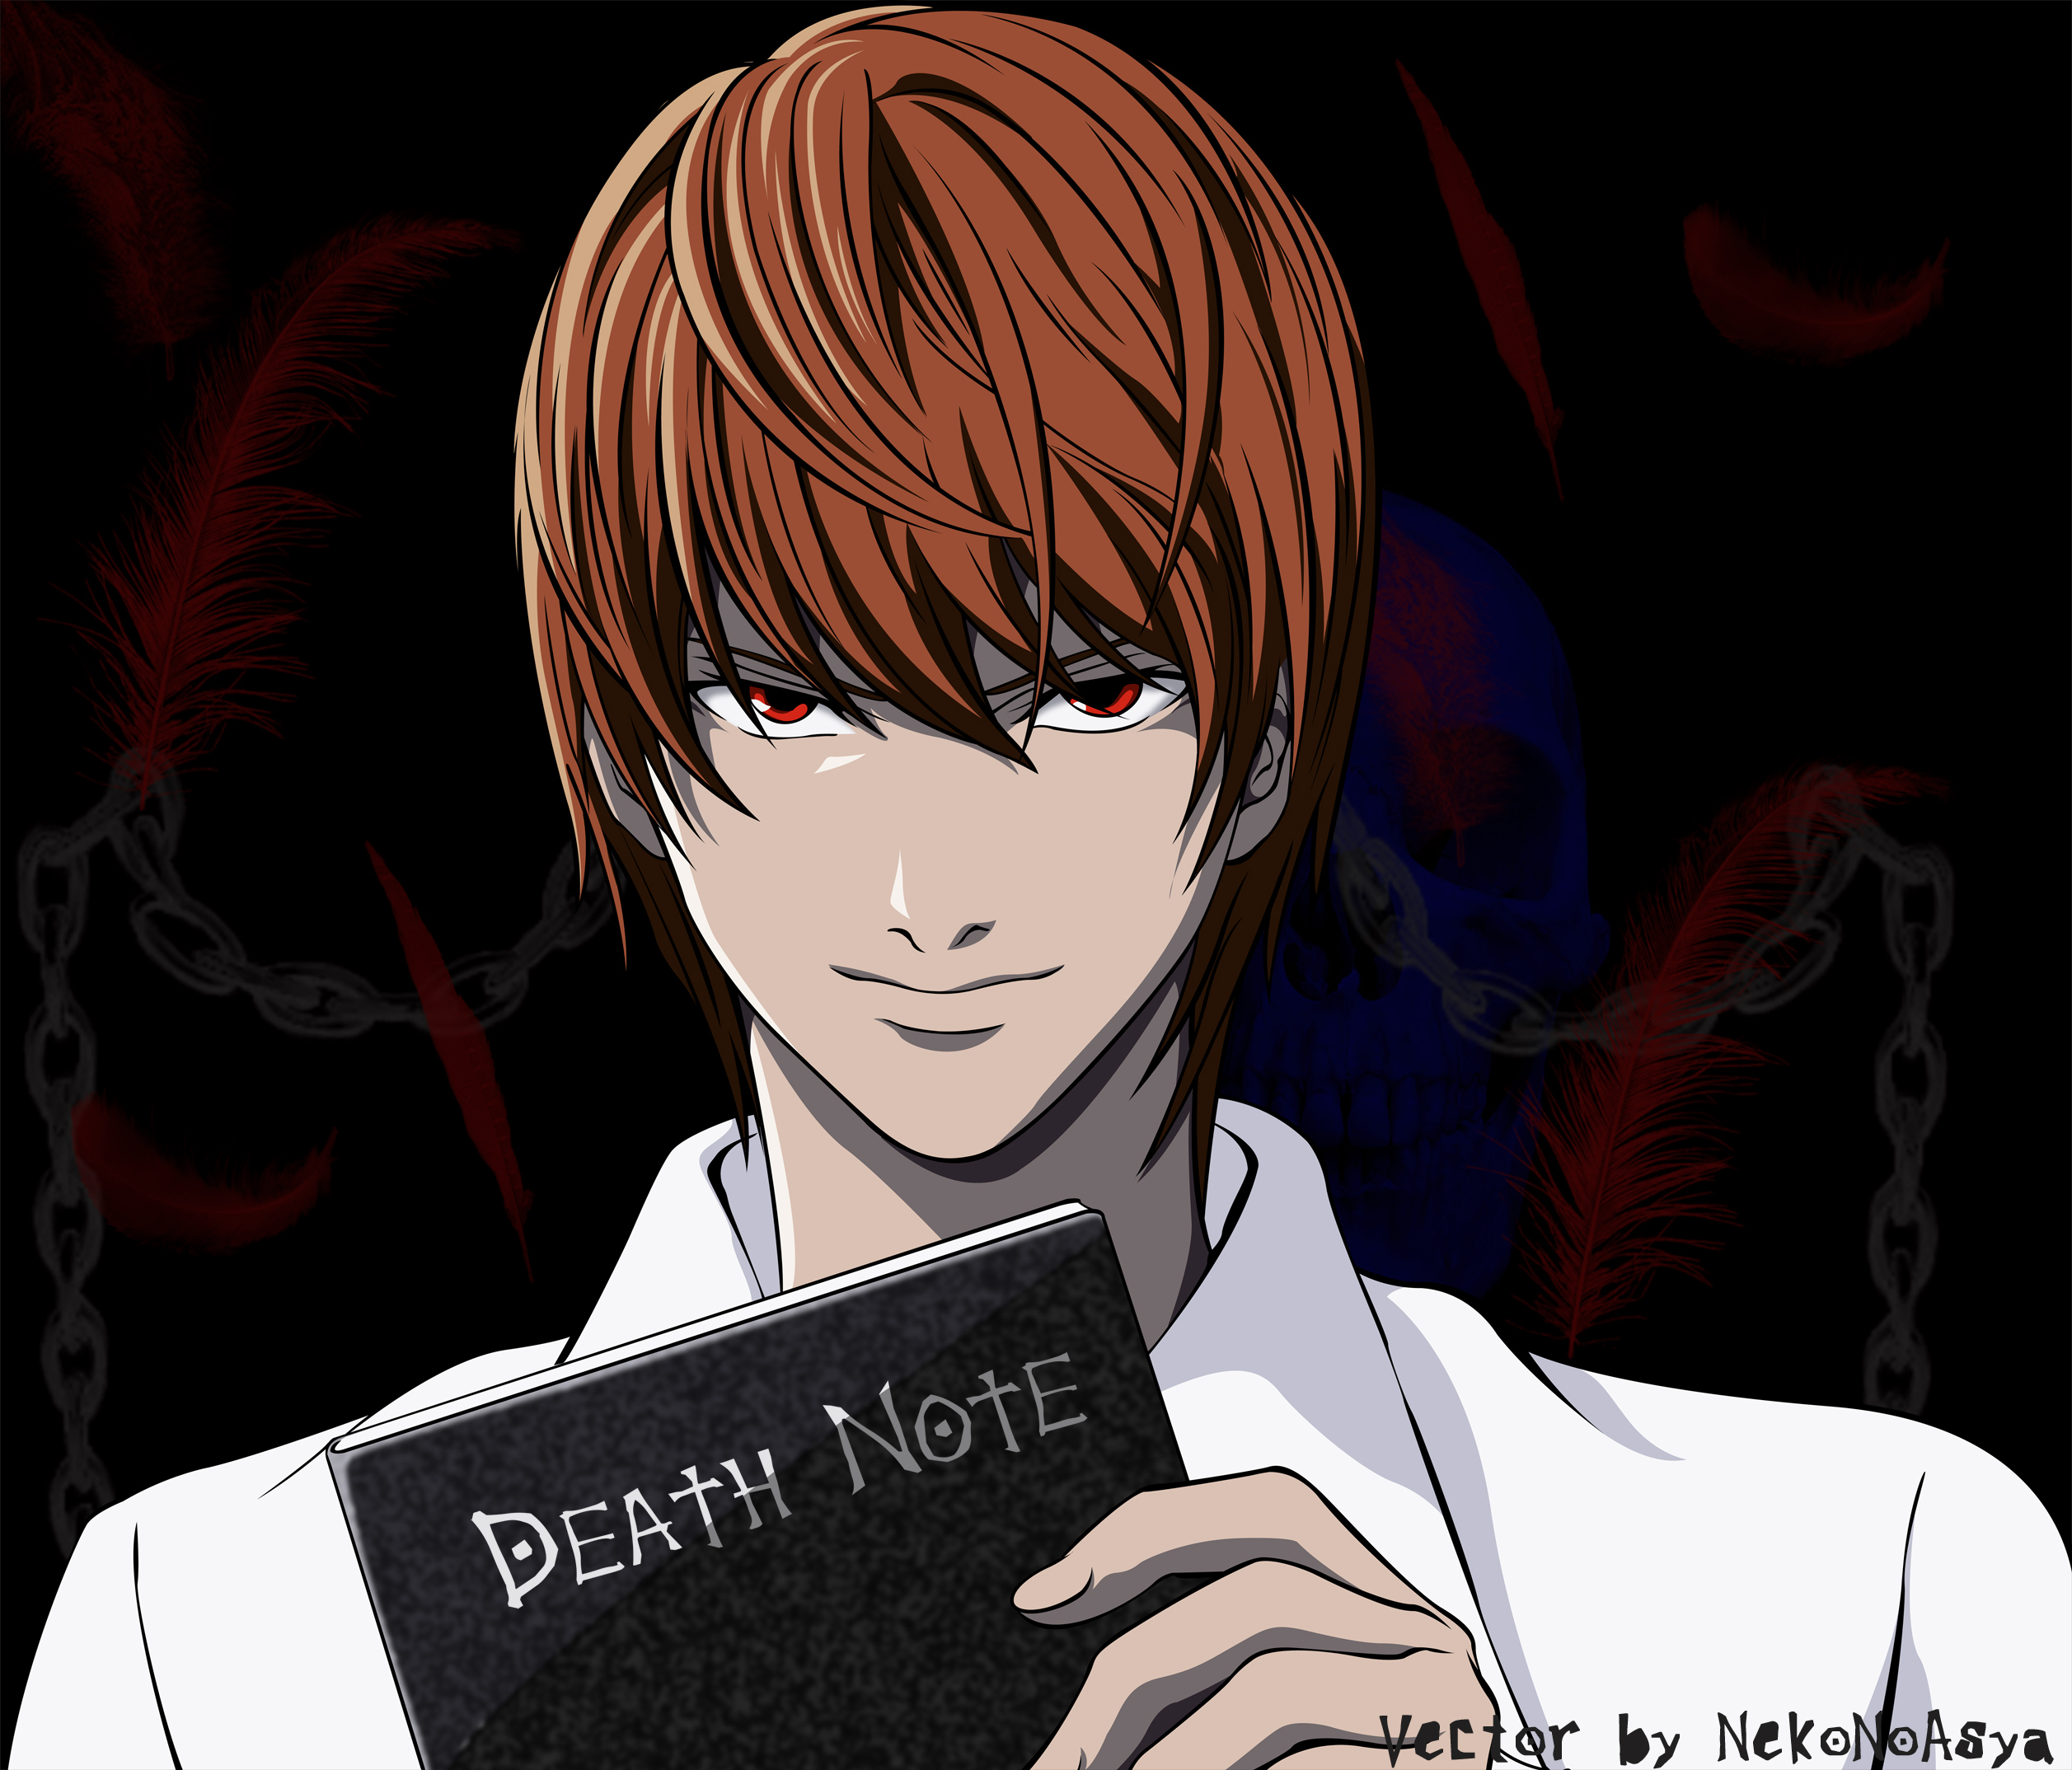 Top 10 Death Note Characters, Ranked